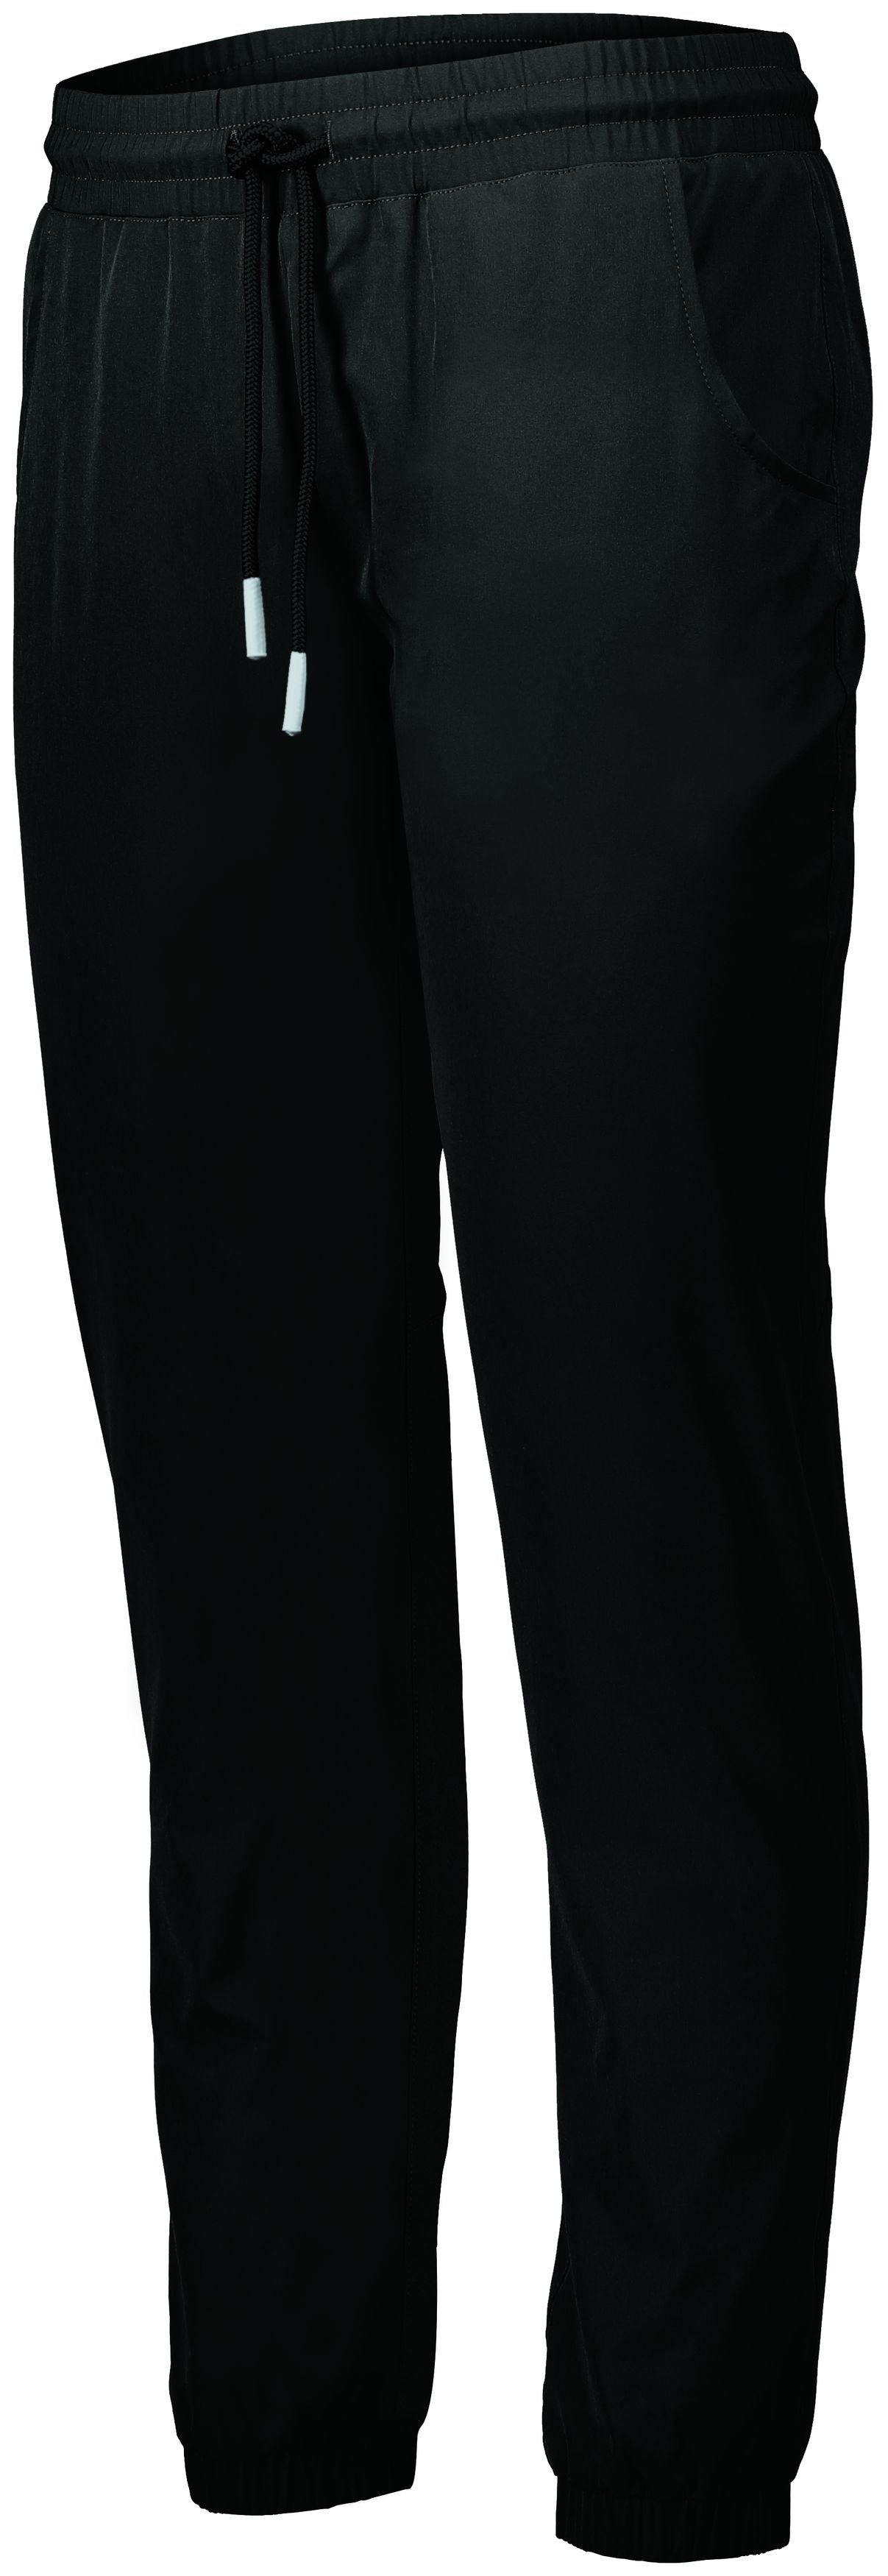 Holloway Ladies Weld Jogger in Black  -Part of the Ladies, Holloway, Weld-Collection product lines at KanaleyCreations.com